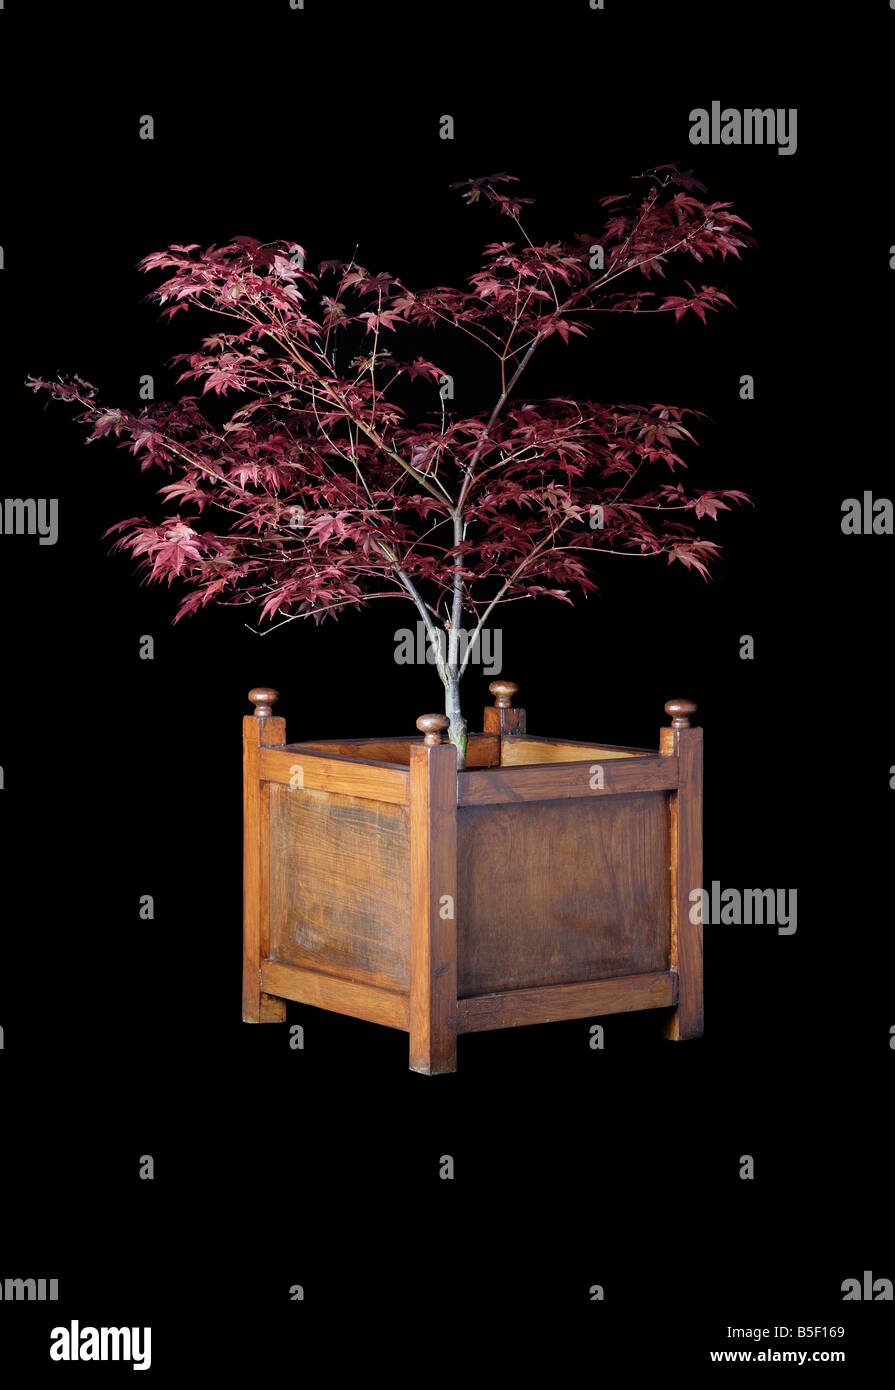 Tree in a wooden planter Stock Photo